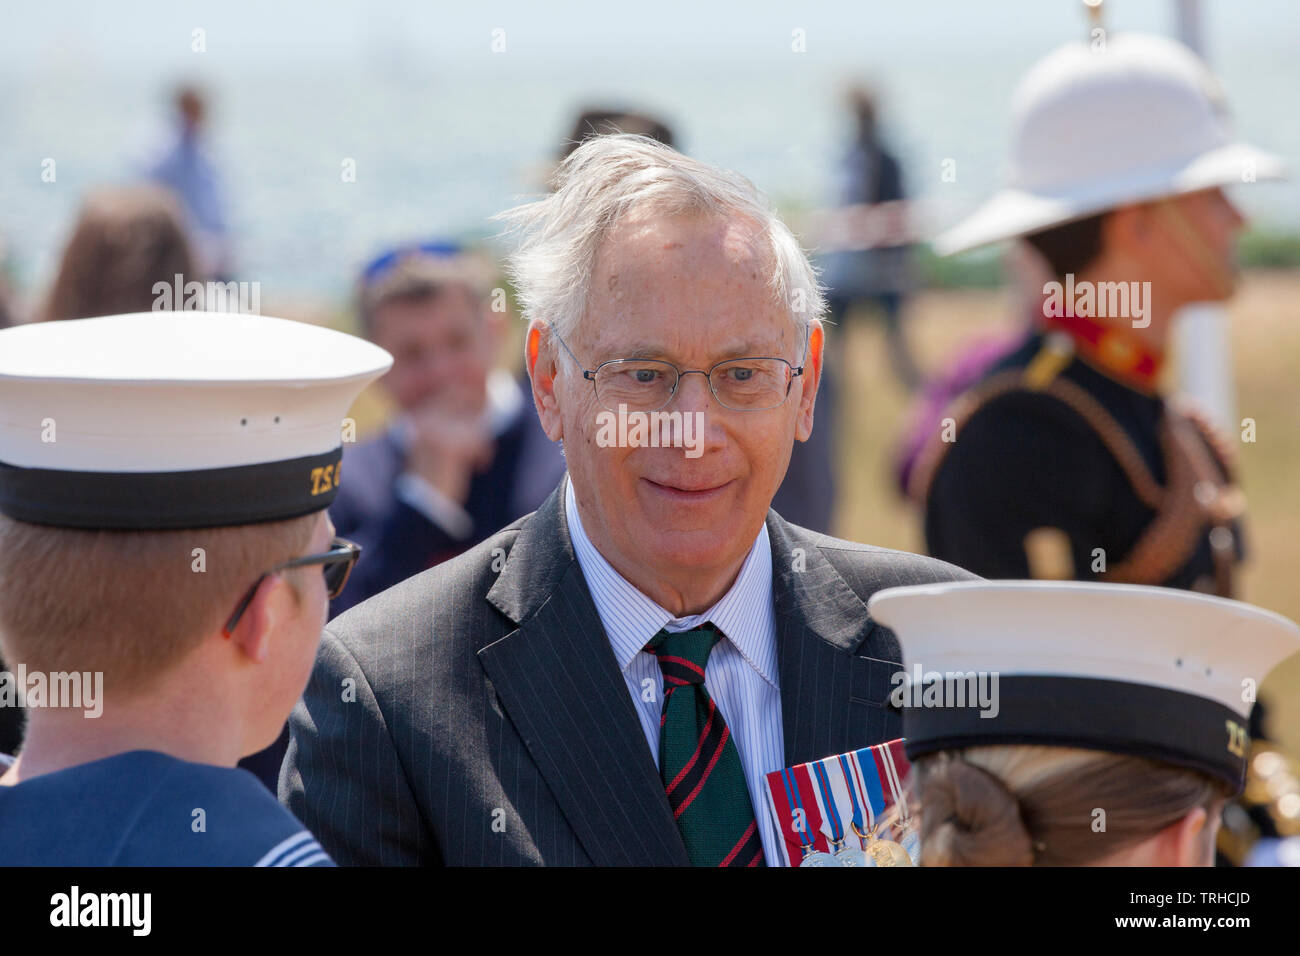 HRH The Duke of Gloucester Talks to Sea Cadets. D Day Commemoration at the COPP (Combined Operation Pilotage Parties) Memorial on the seafront on Hayling Island.  On 2 May 1944, Hayling Island seafront was used for practice amphibious landings, known as Exercise Fabius 2.   The COPP Unit was set up on Hayling Island under the instruction of Lord Mountbatten in 1943.  The Memorial is dedicated to the soldiers who trained as frogmen and canoeists for beach reconnaissance and other covert operations prior to the Allied landings on enemy occupied territory. Stock Photo